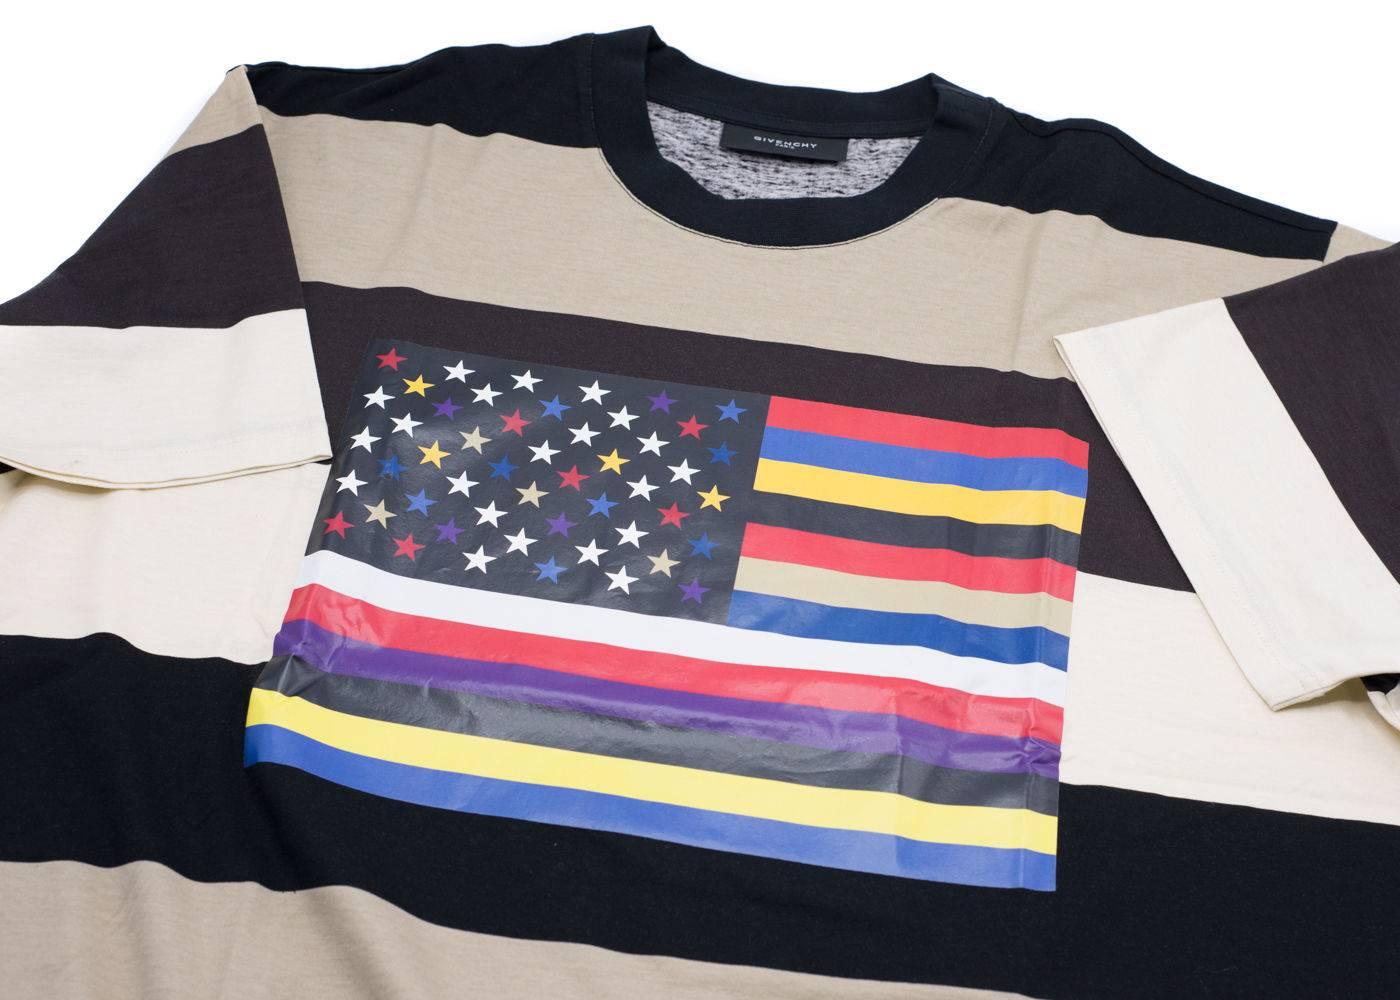 Brand New Givenchy Men's Graphic T-Shirt
New in Bag with Original Tags
Retails in Stores & Online for $995
Men's Size Medium Fits True to Size

Givenchy's graphic T-Shirt detailed with a multi-color American flag on the front of the shirt. Perfect